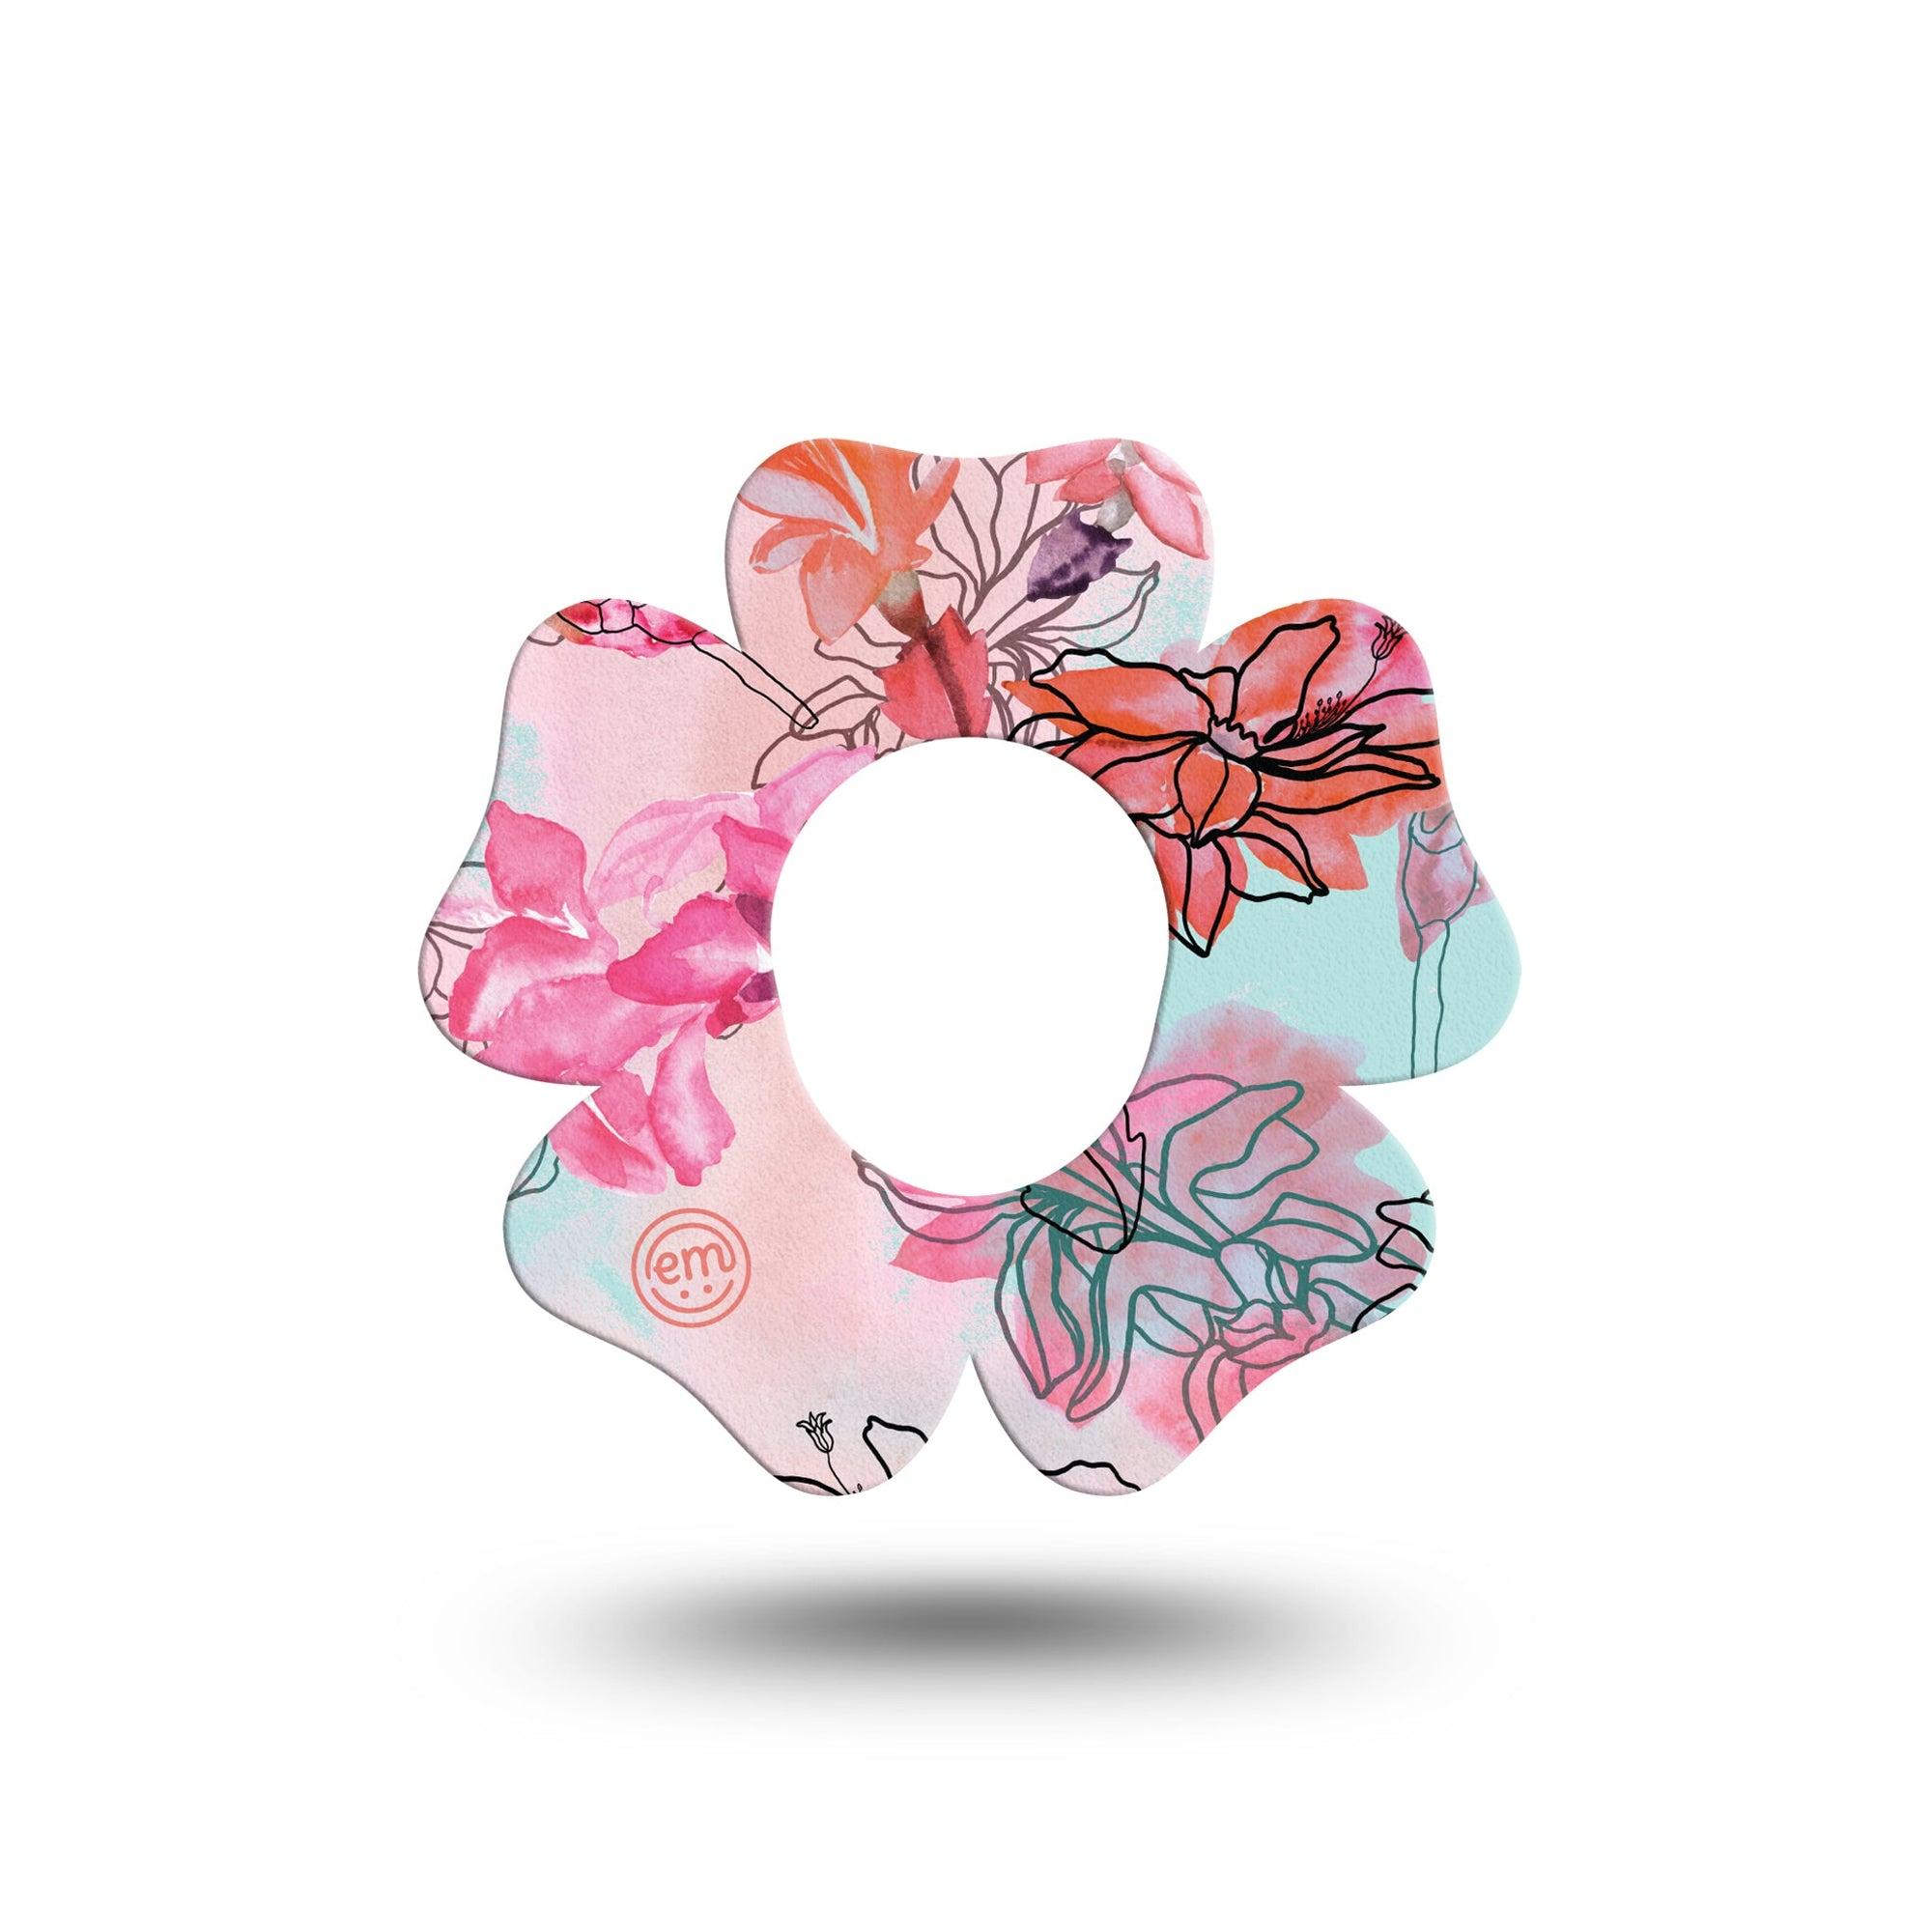 ExpressionMed WhimsicalBlossoms Flower Dexcom G7 Tape, Single, Pastel Floral Artwork Themed, CGM Overlay Patch Design